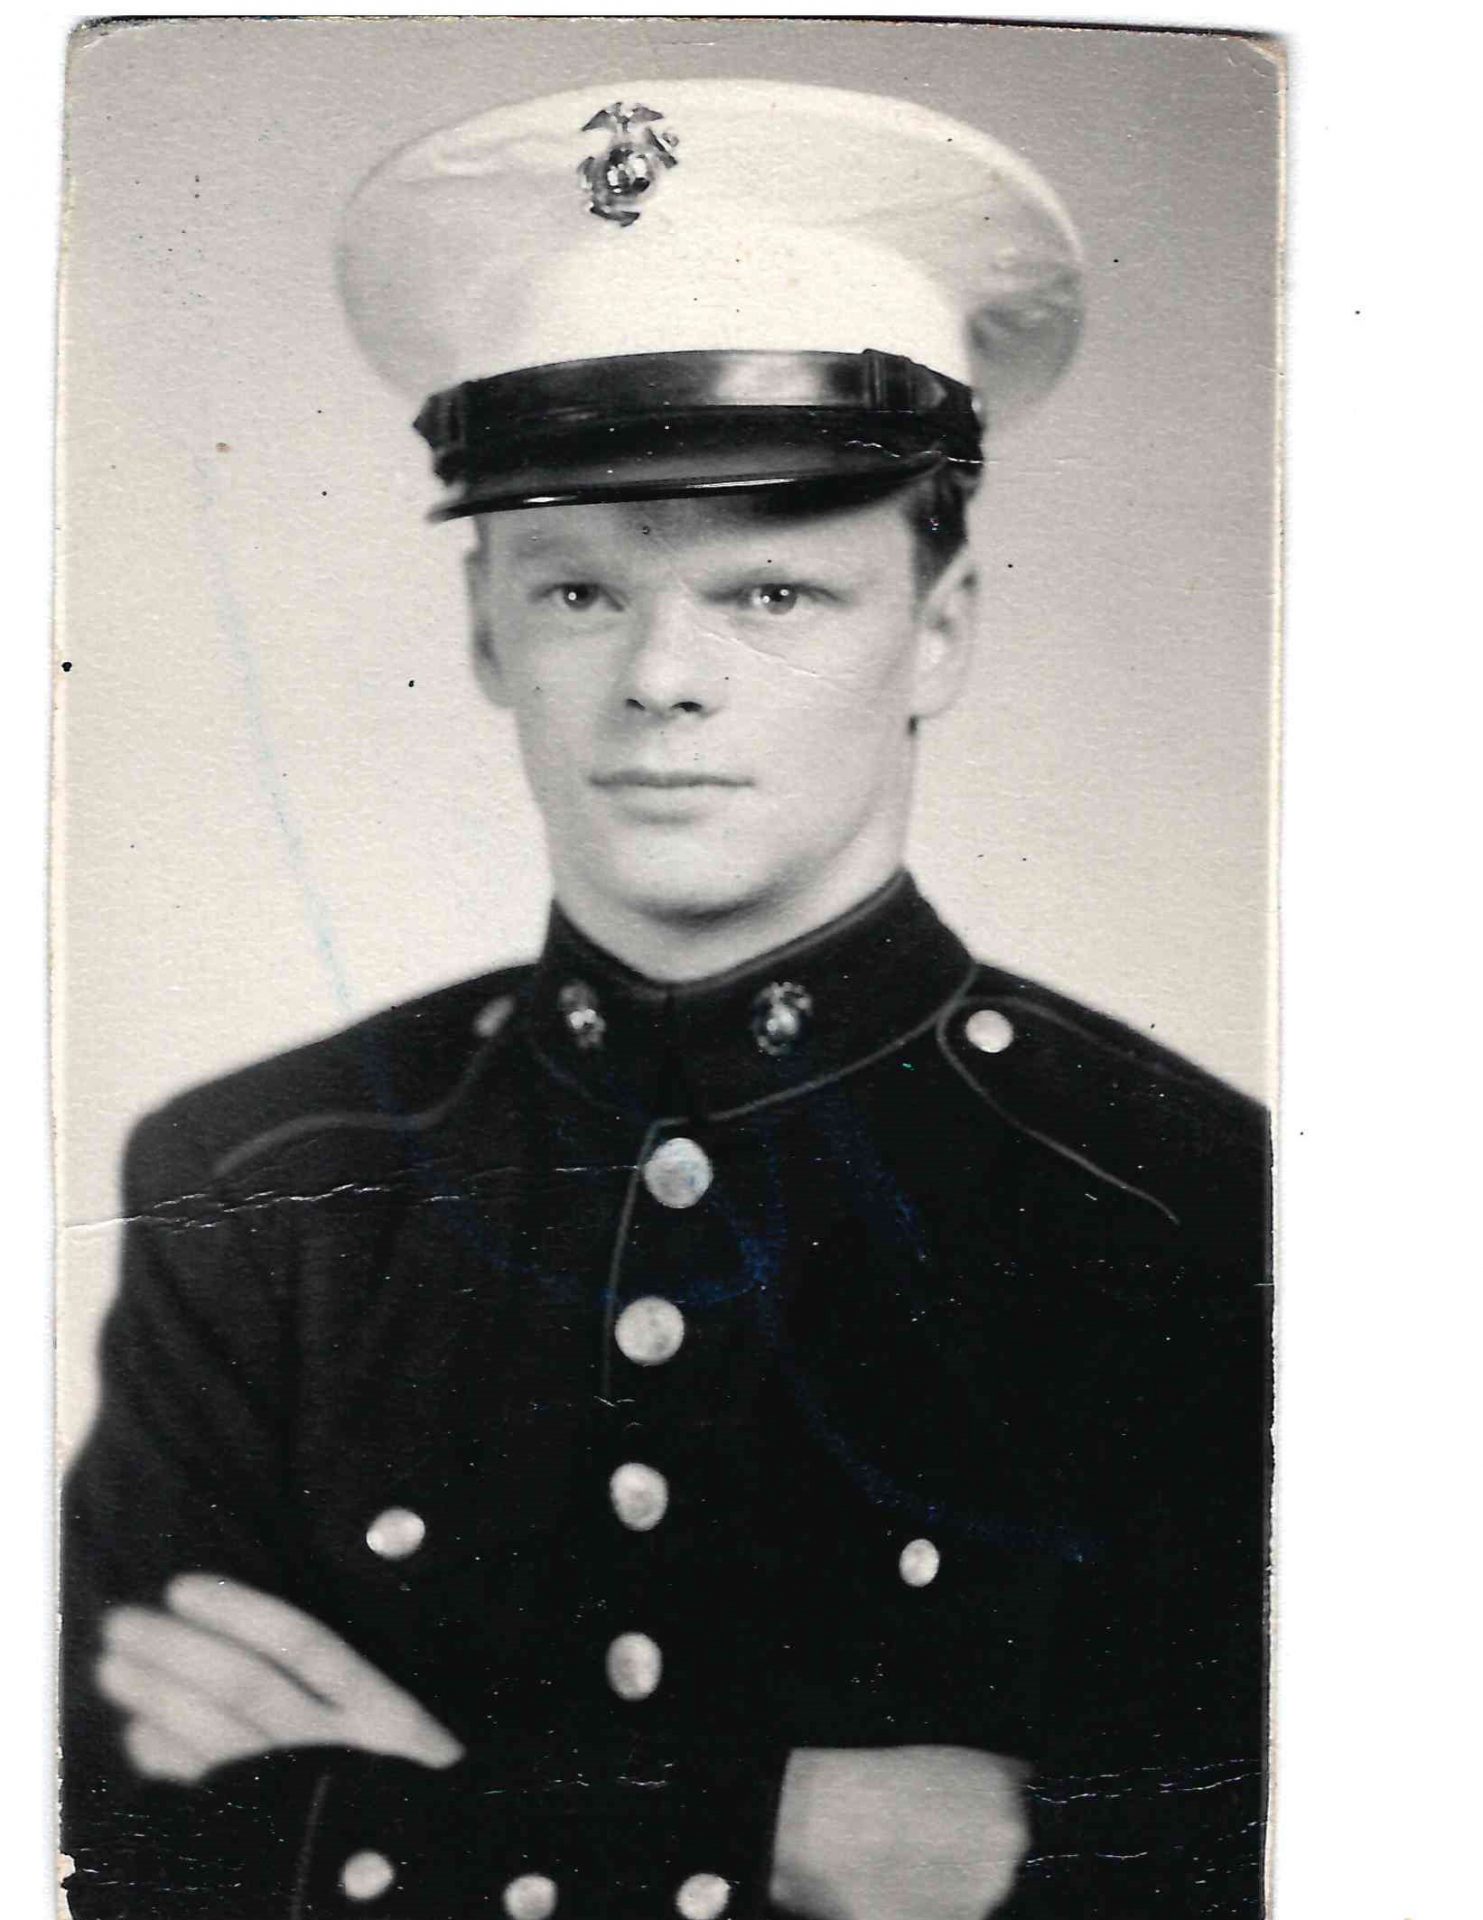 Barry's military picture